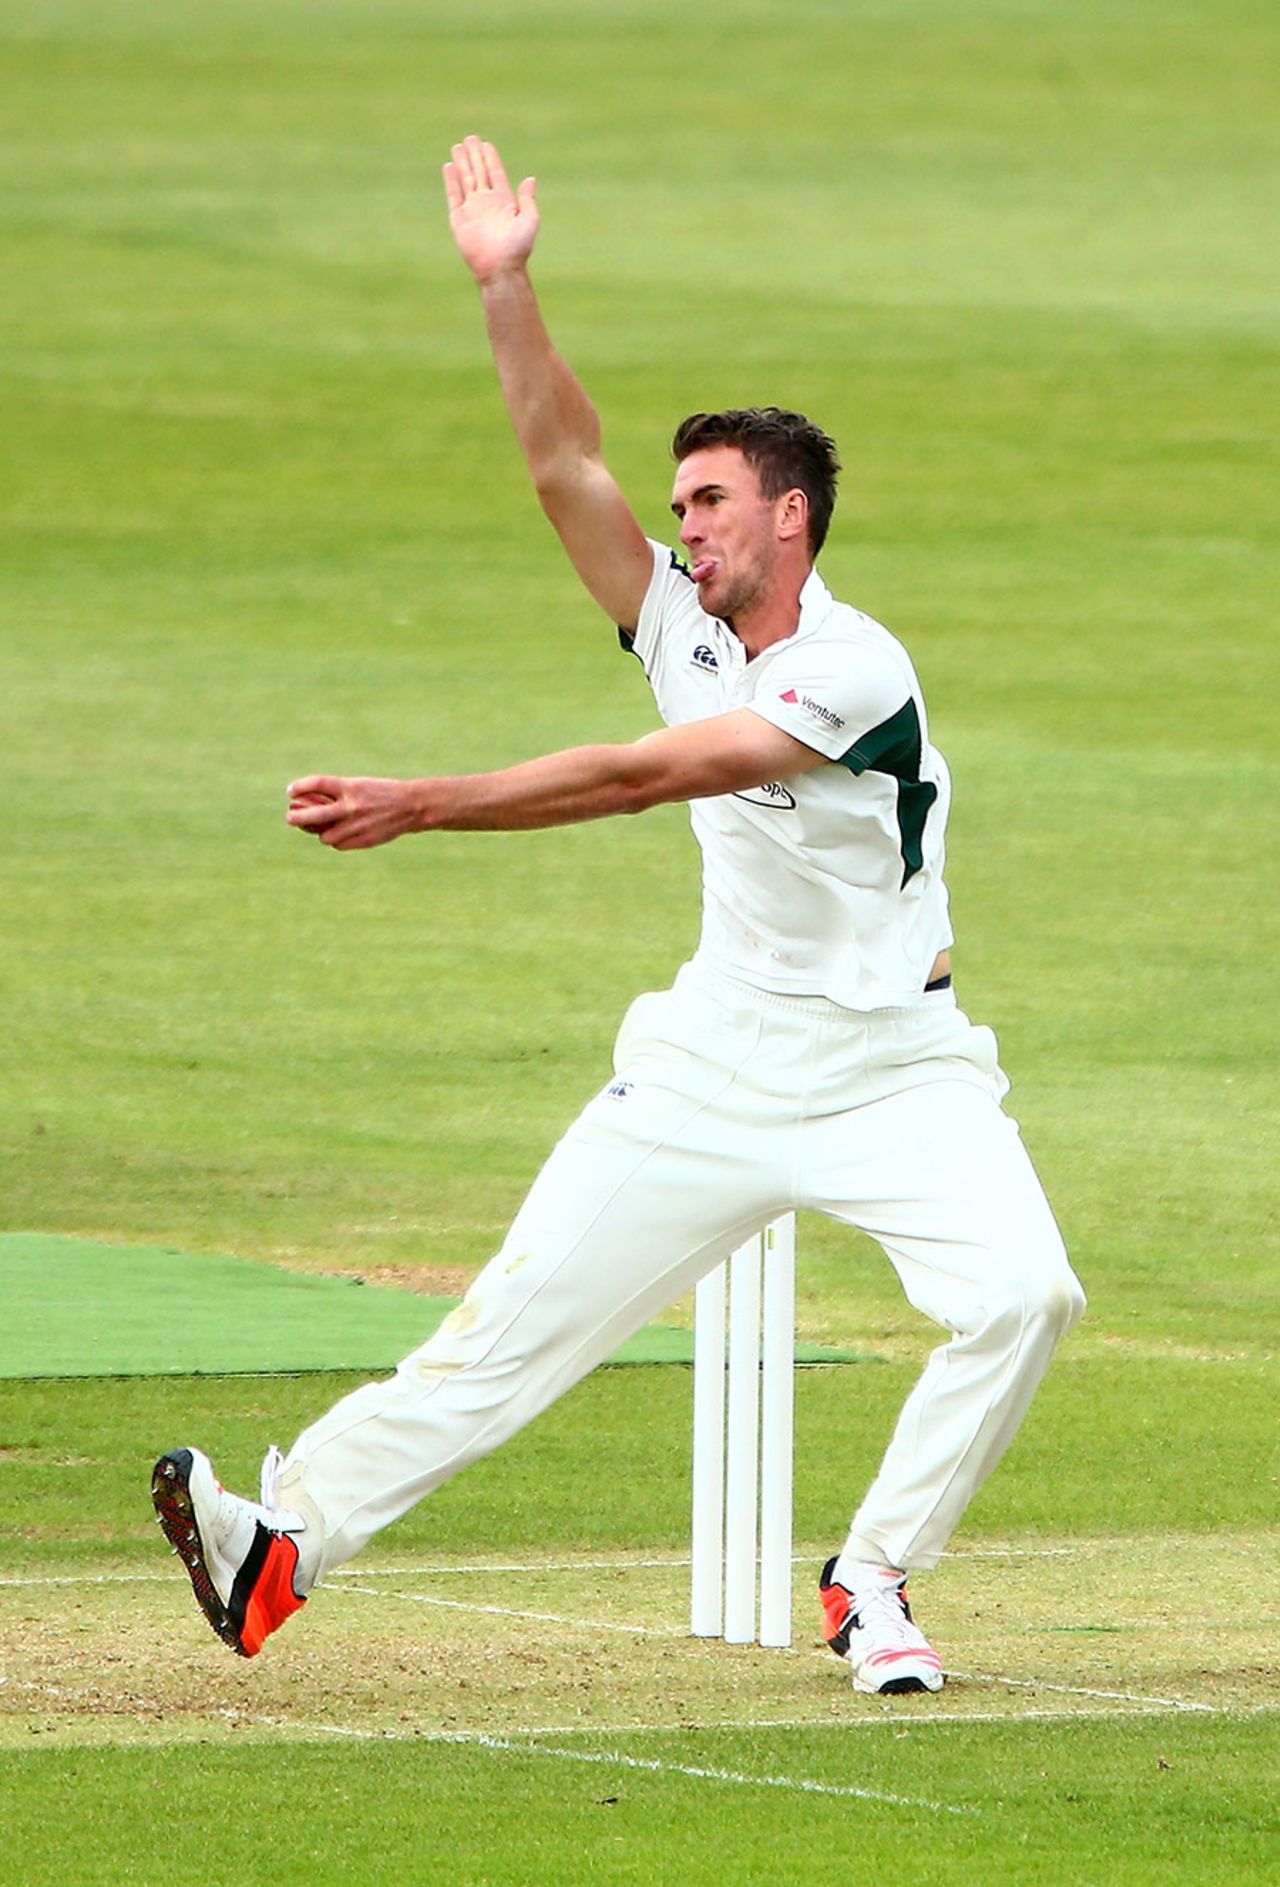 Jack Shantry bowled a tight first eight overs but failed to strike, Hampshire v Worcestershire, County Championship Division One, Ageas Bowl, 1st day, May 31, 2015